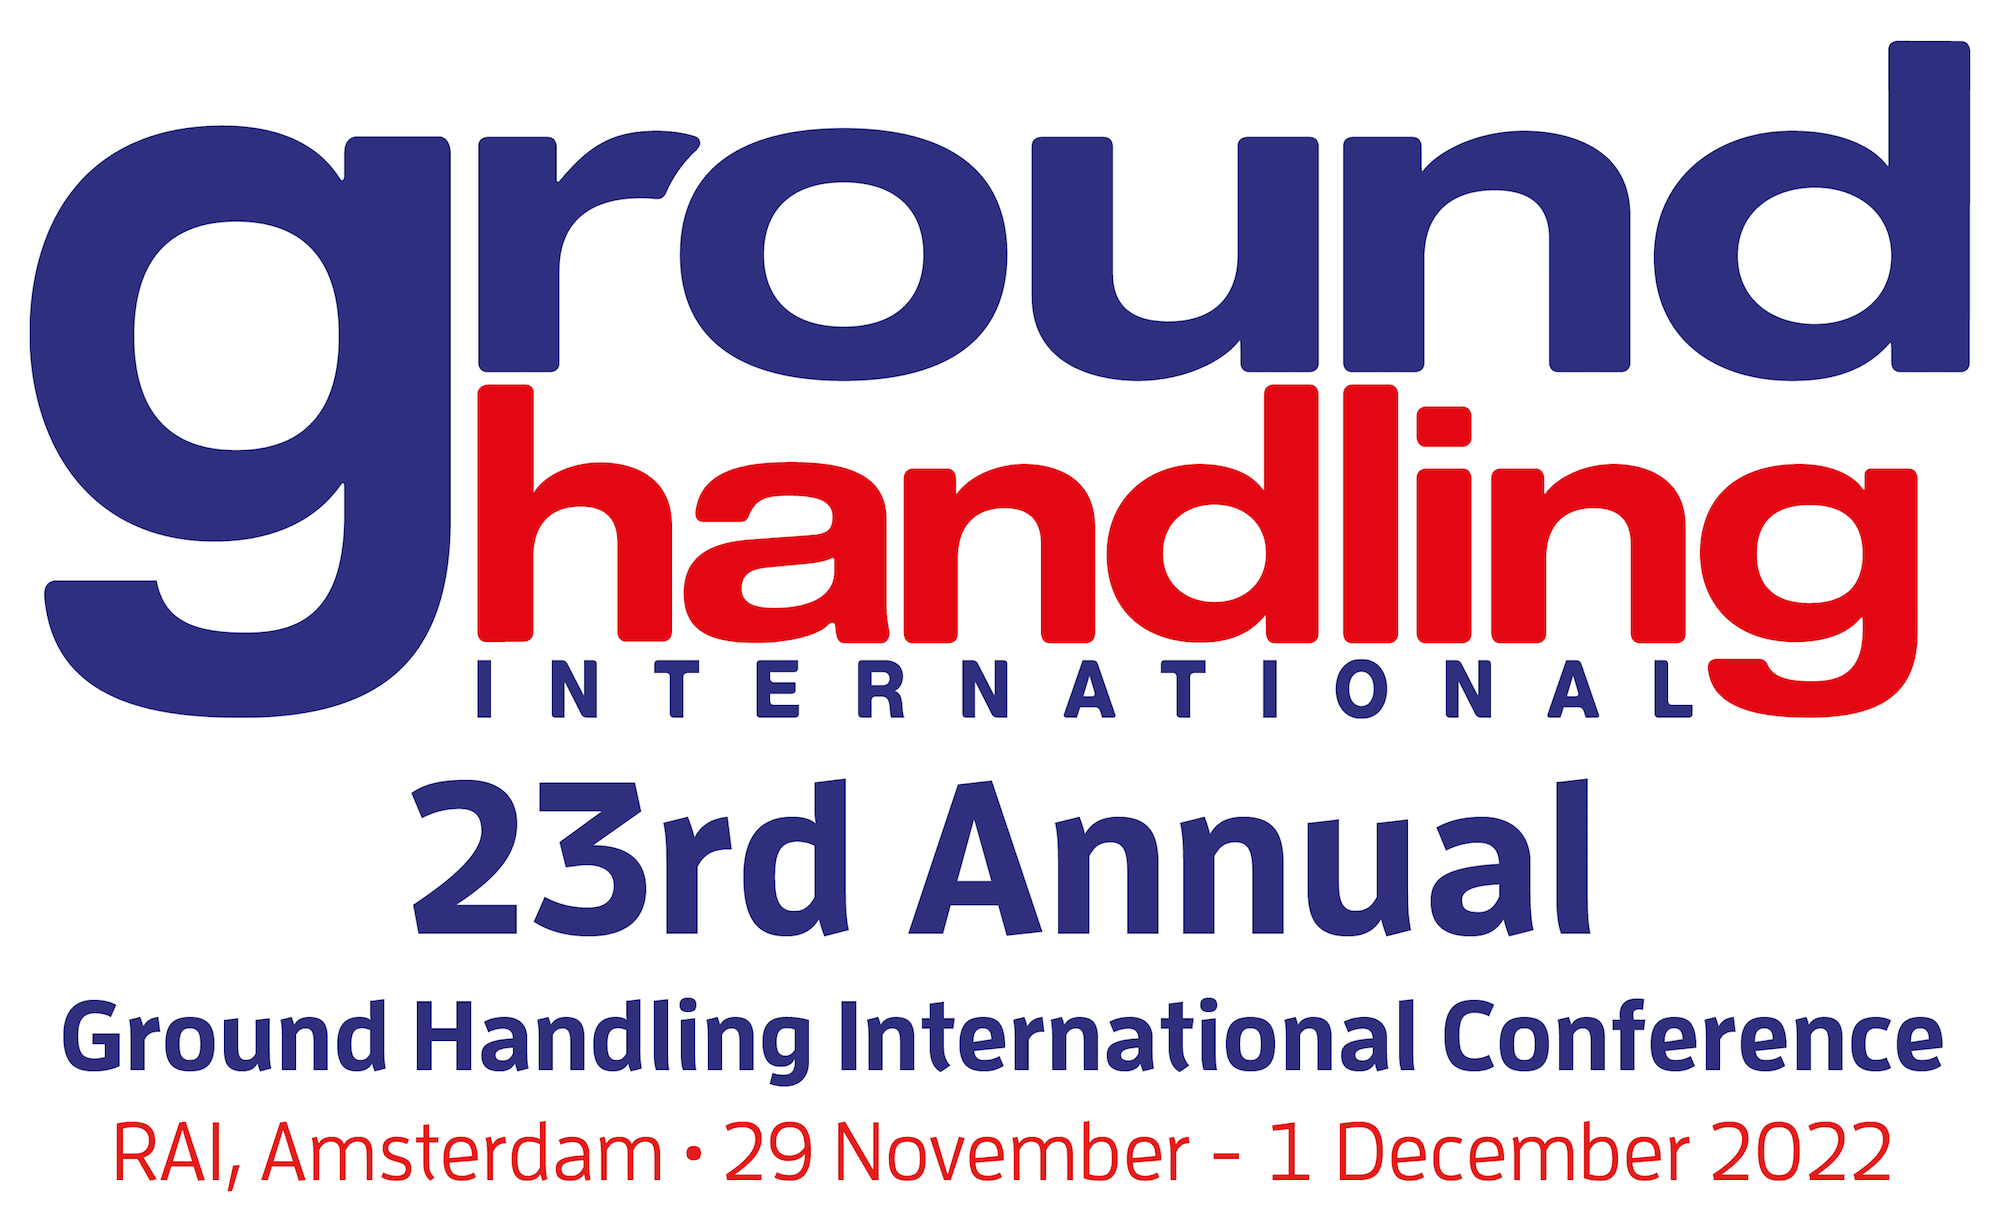 One-to-One meetings are open for booking at GHI's Annual Conference